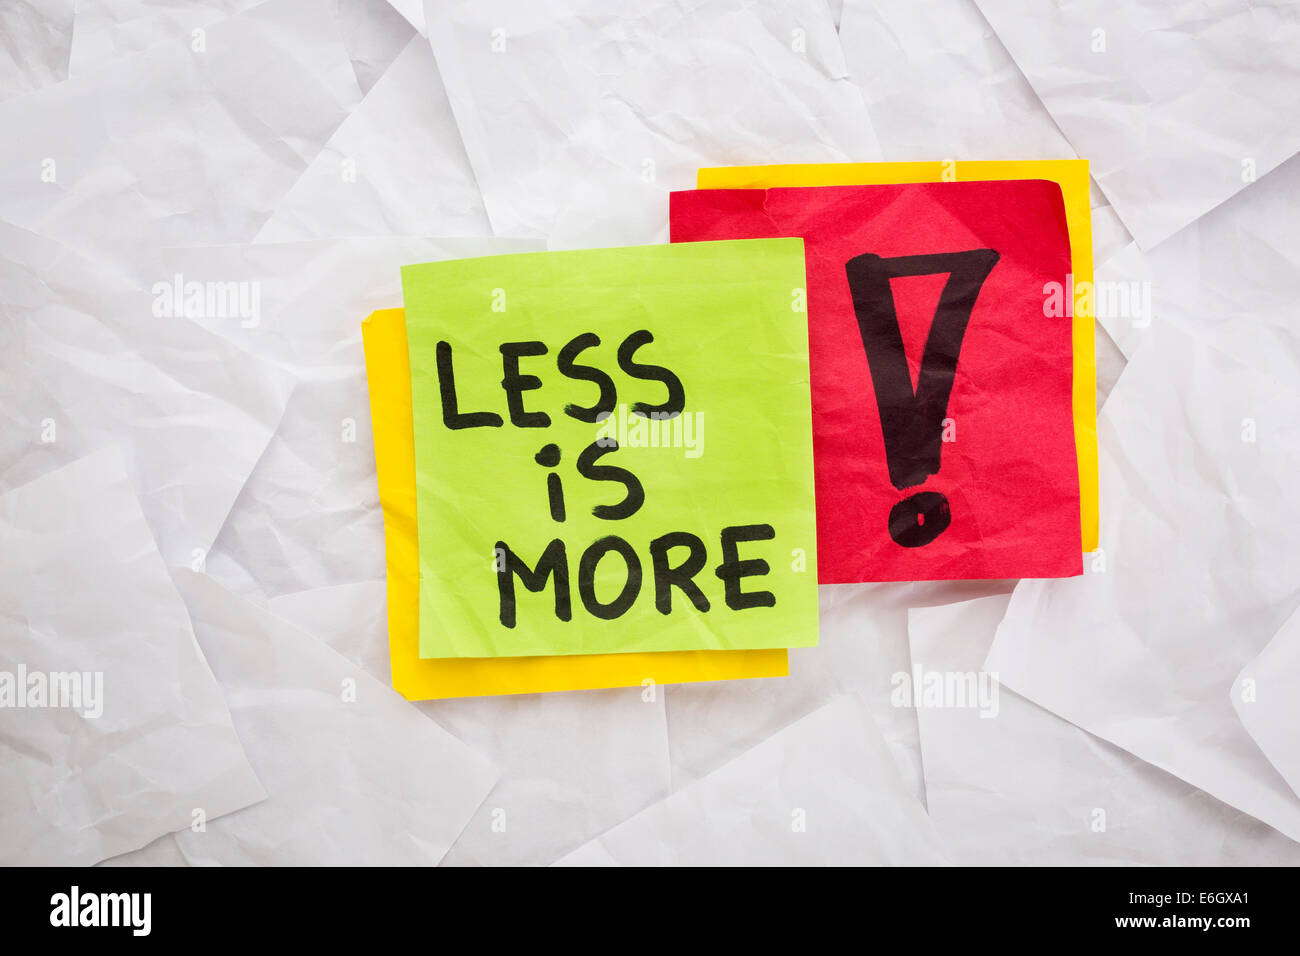 less is more - reminder or advice handwritten on colorful sticky notes - minimalist design concept Stock Photo